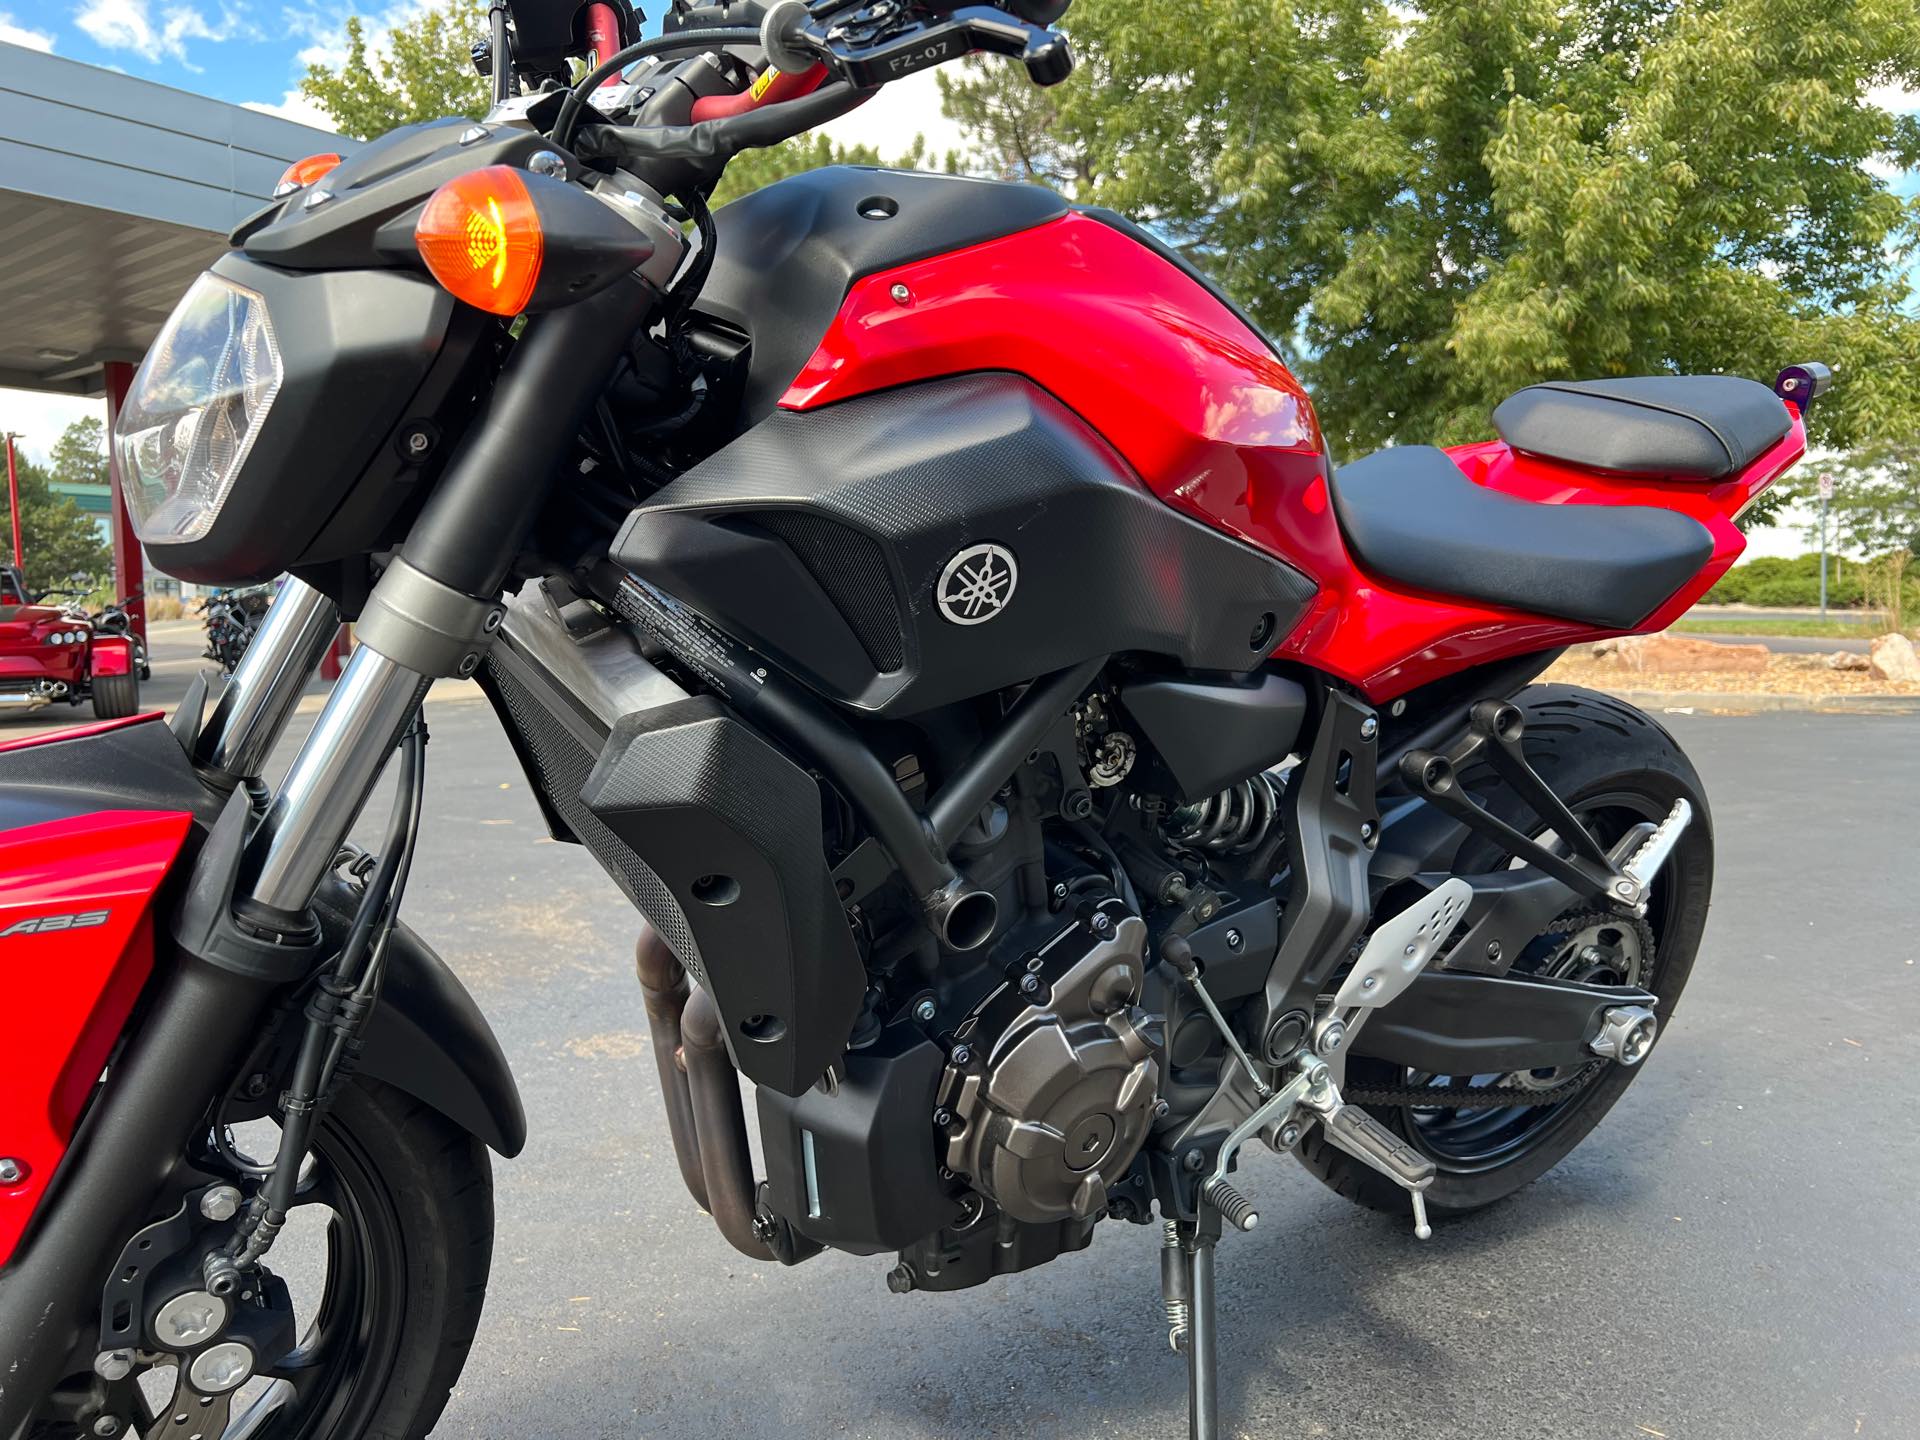 2017 Yamaha FZ 07 at Aces Motorcycles - Fort Collins